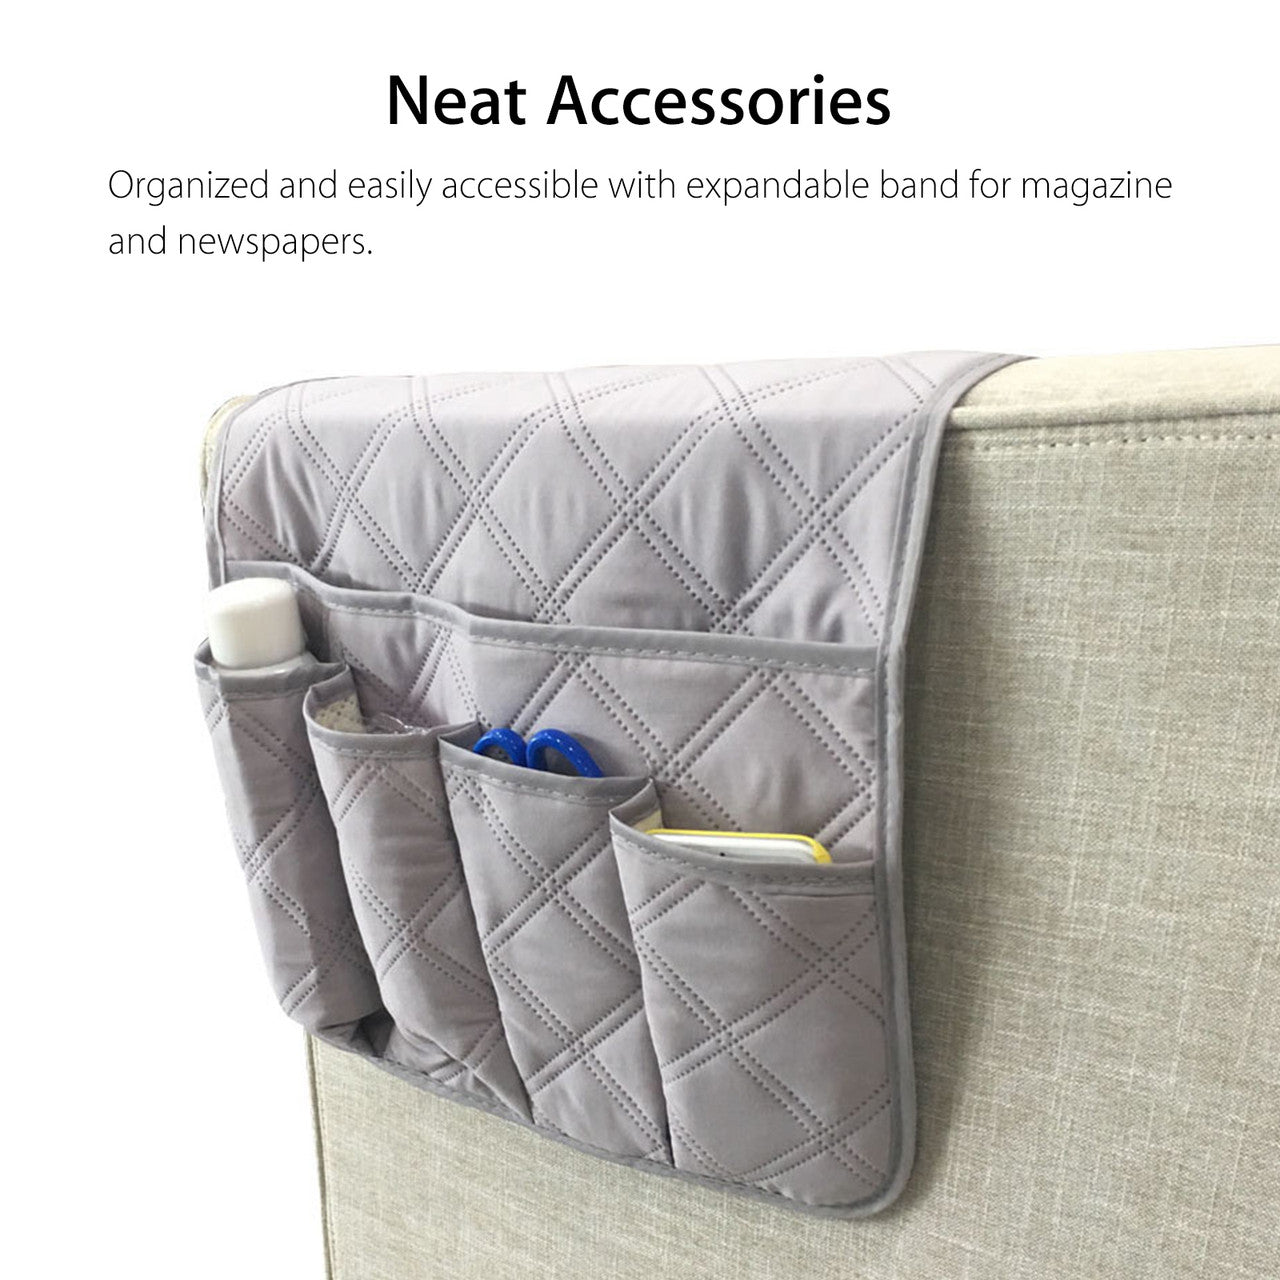 Waterproof Double Sided Armrest Storage Holder Cover with 5 Pockets, Armchair Caddy for Smart Phone, Book, Magazines, Ipad, TV Remote Control Holder, Beige